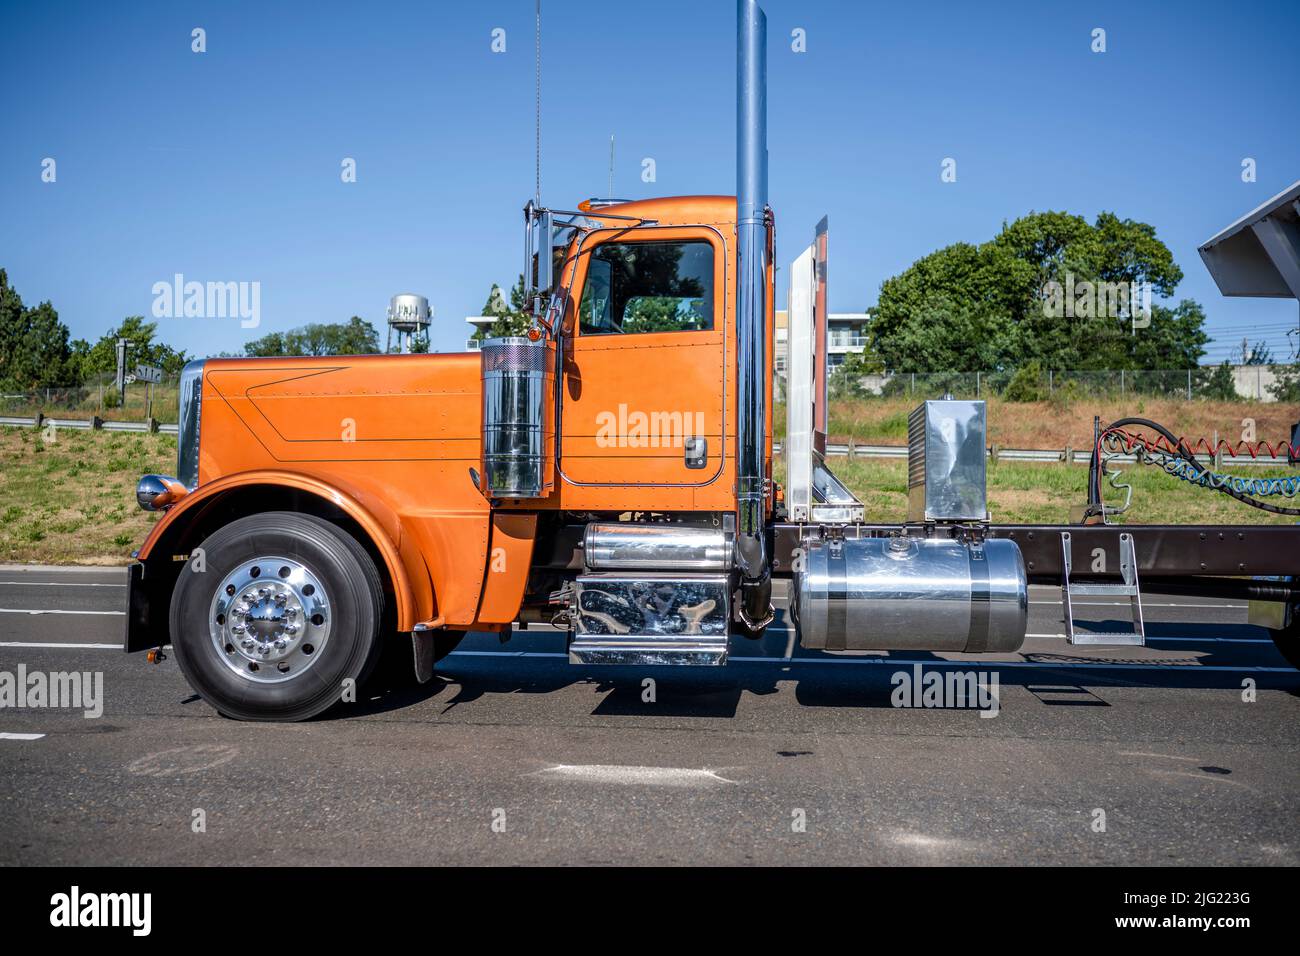 Low cab profile to improve aerodynamics big rig classic orange  semi truck tractor with chrome accessories and tall exhaust pipes transporting cargo i Stock Photo